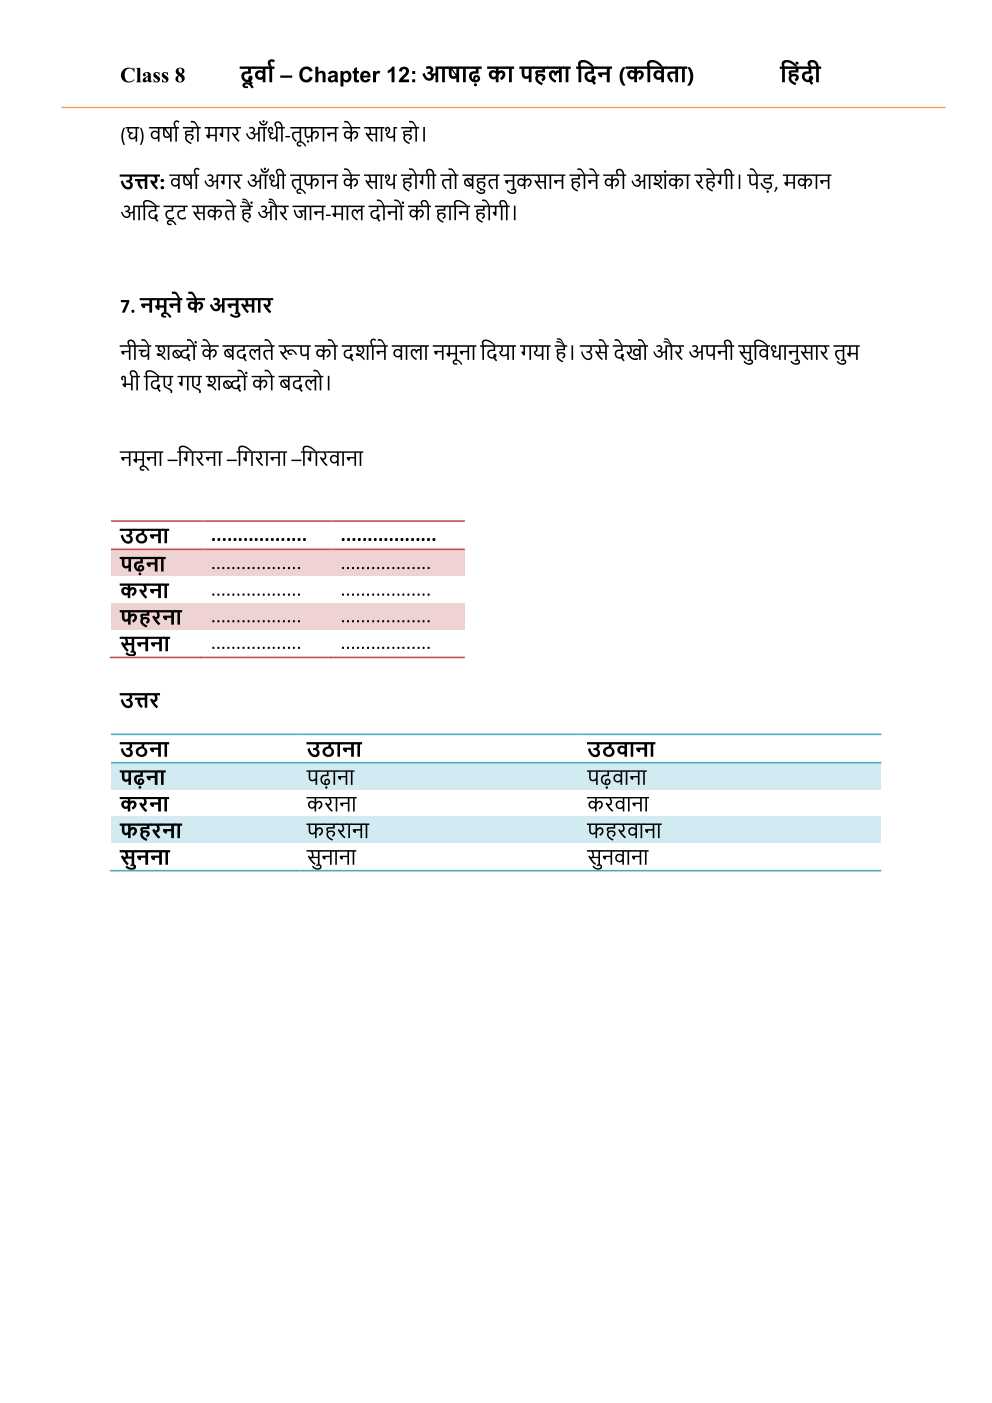 NCERT Solutions For Class 8 Hindi Durva Chapter 12